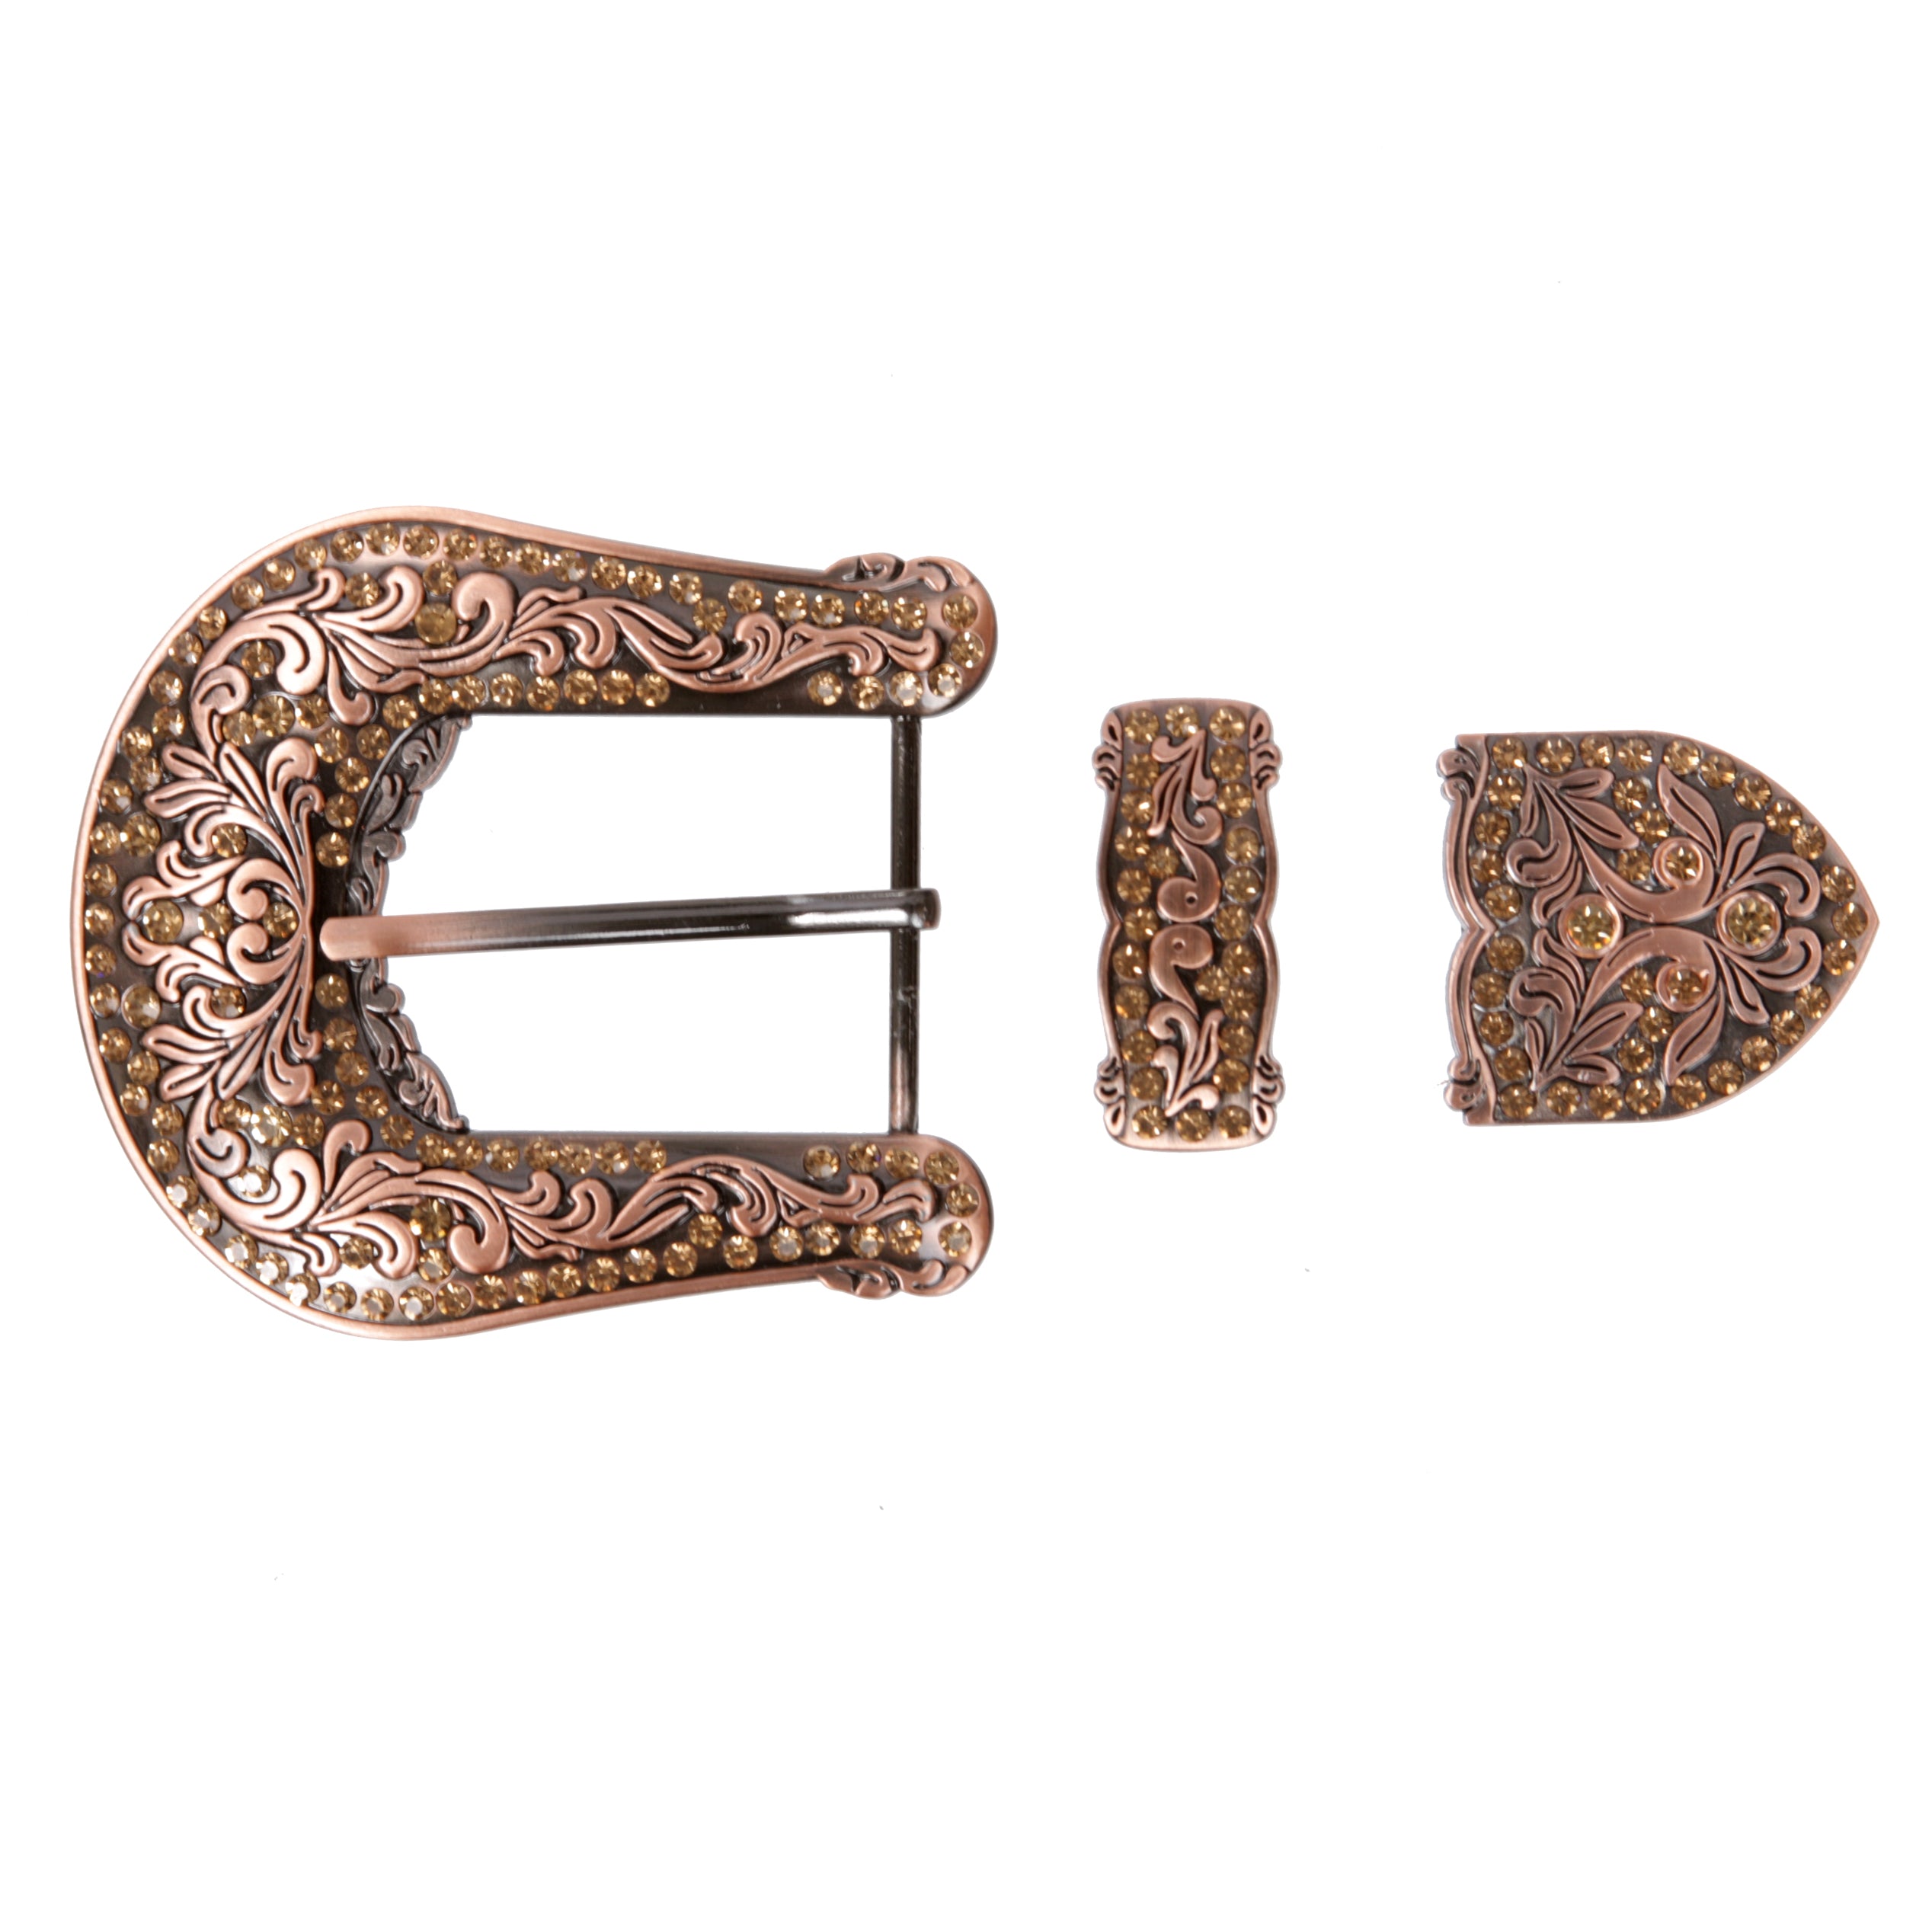 Western Floral Scroll Rhinestone Belt Buckle Set for Replacement Leather Craft